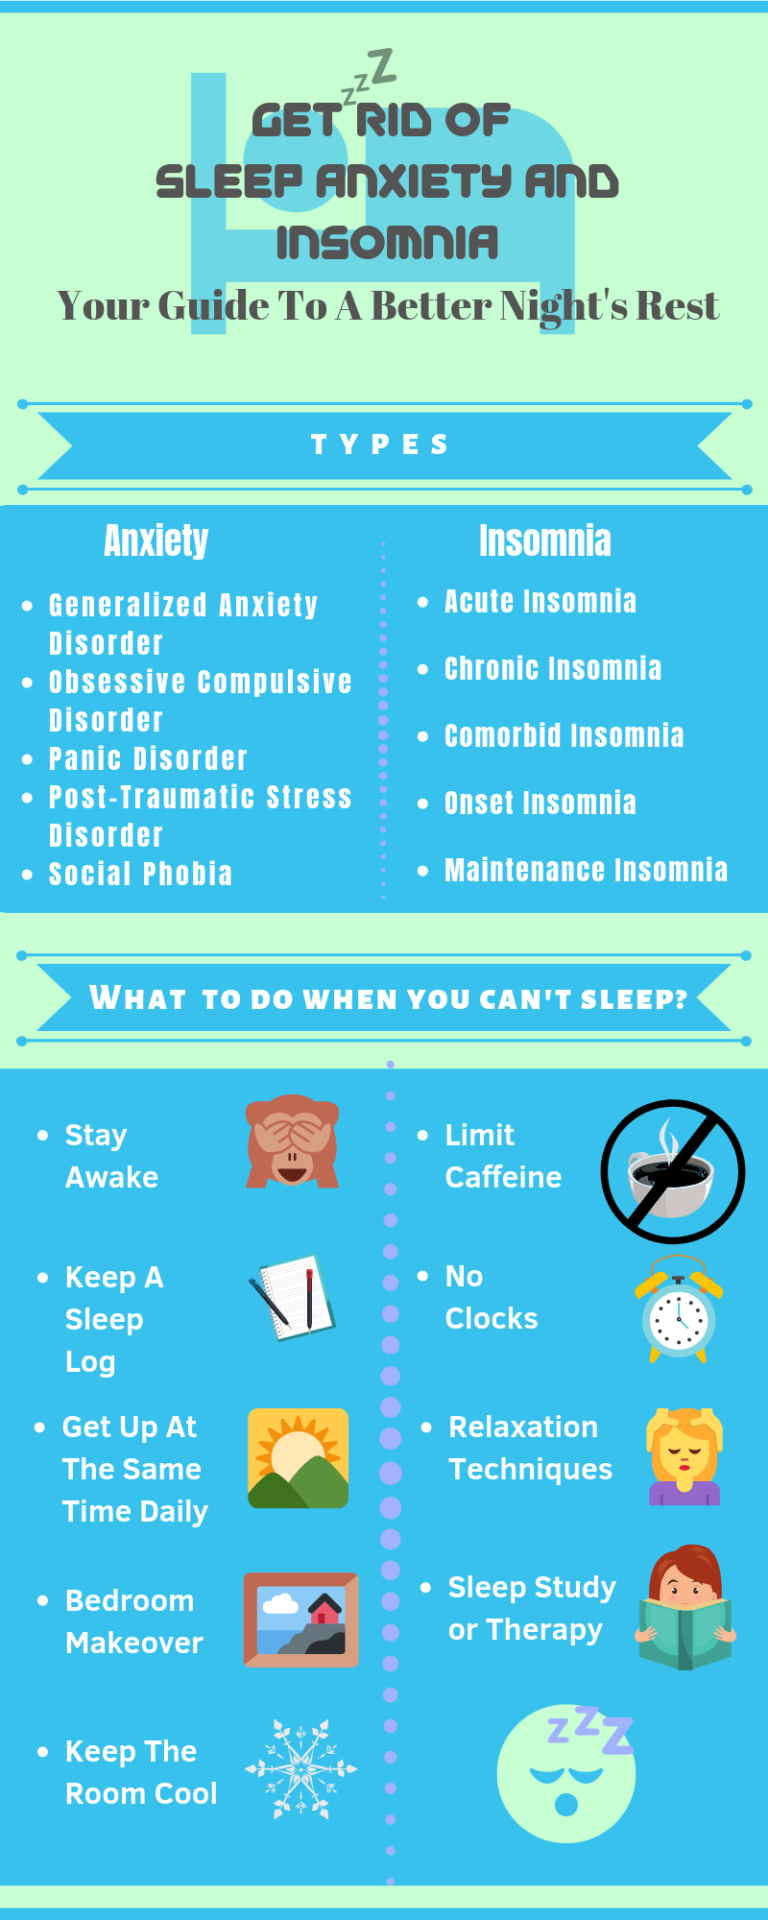 Sleep Anxiety and Insomnia Infographic